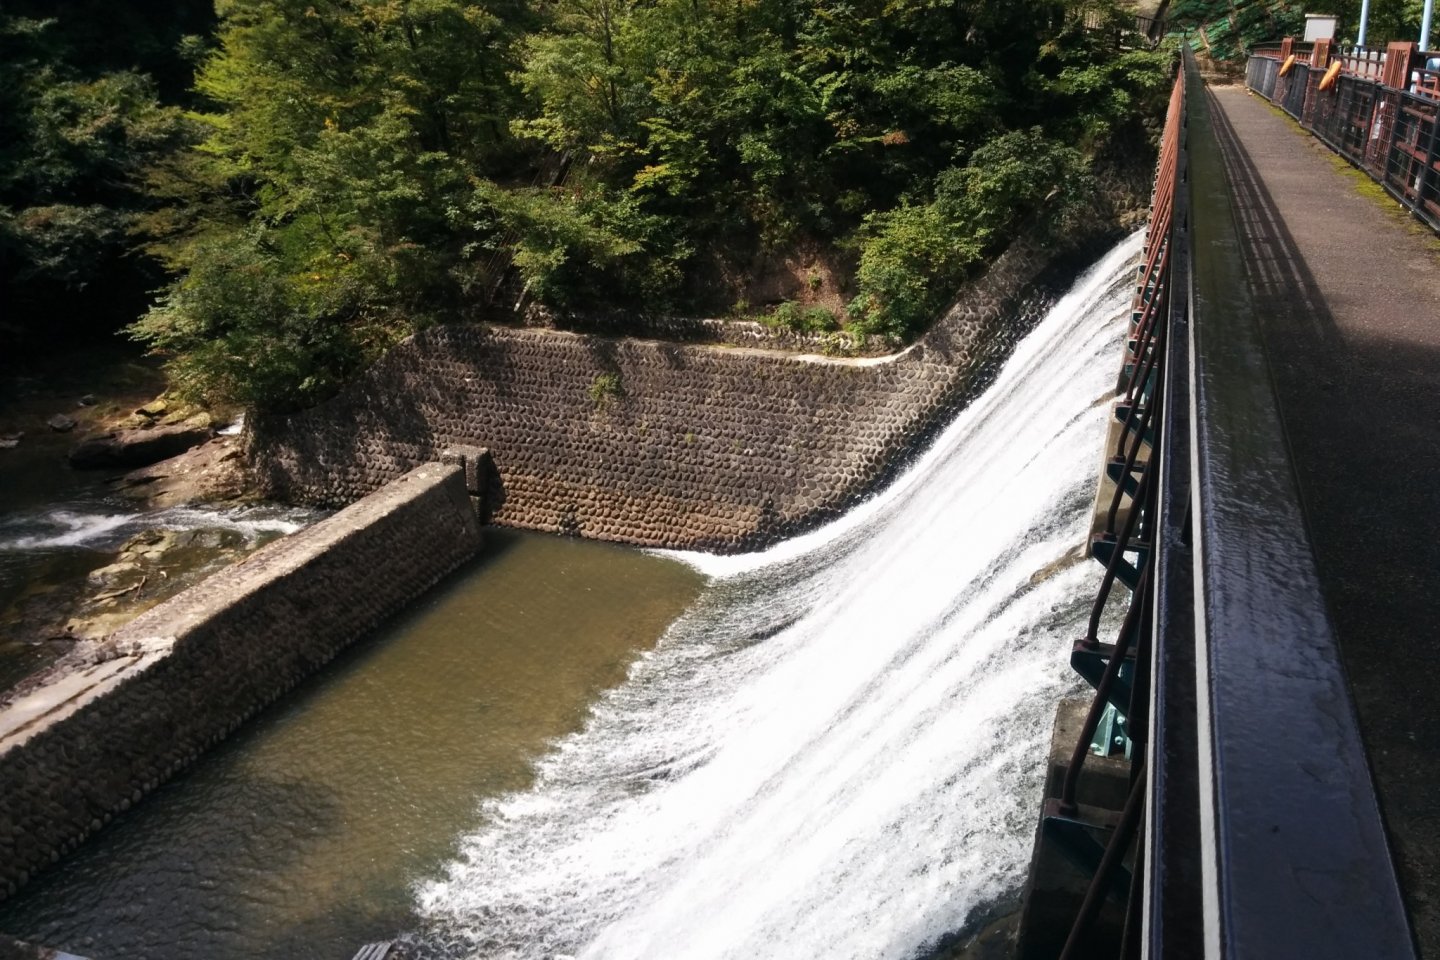 Aoshita Dam #1 is unique because of its white waterfall design